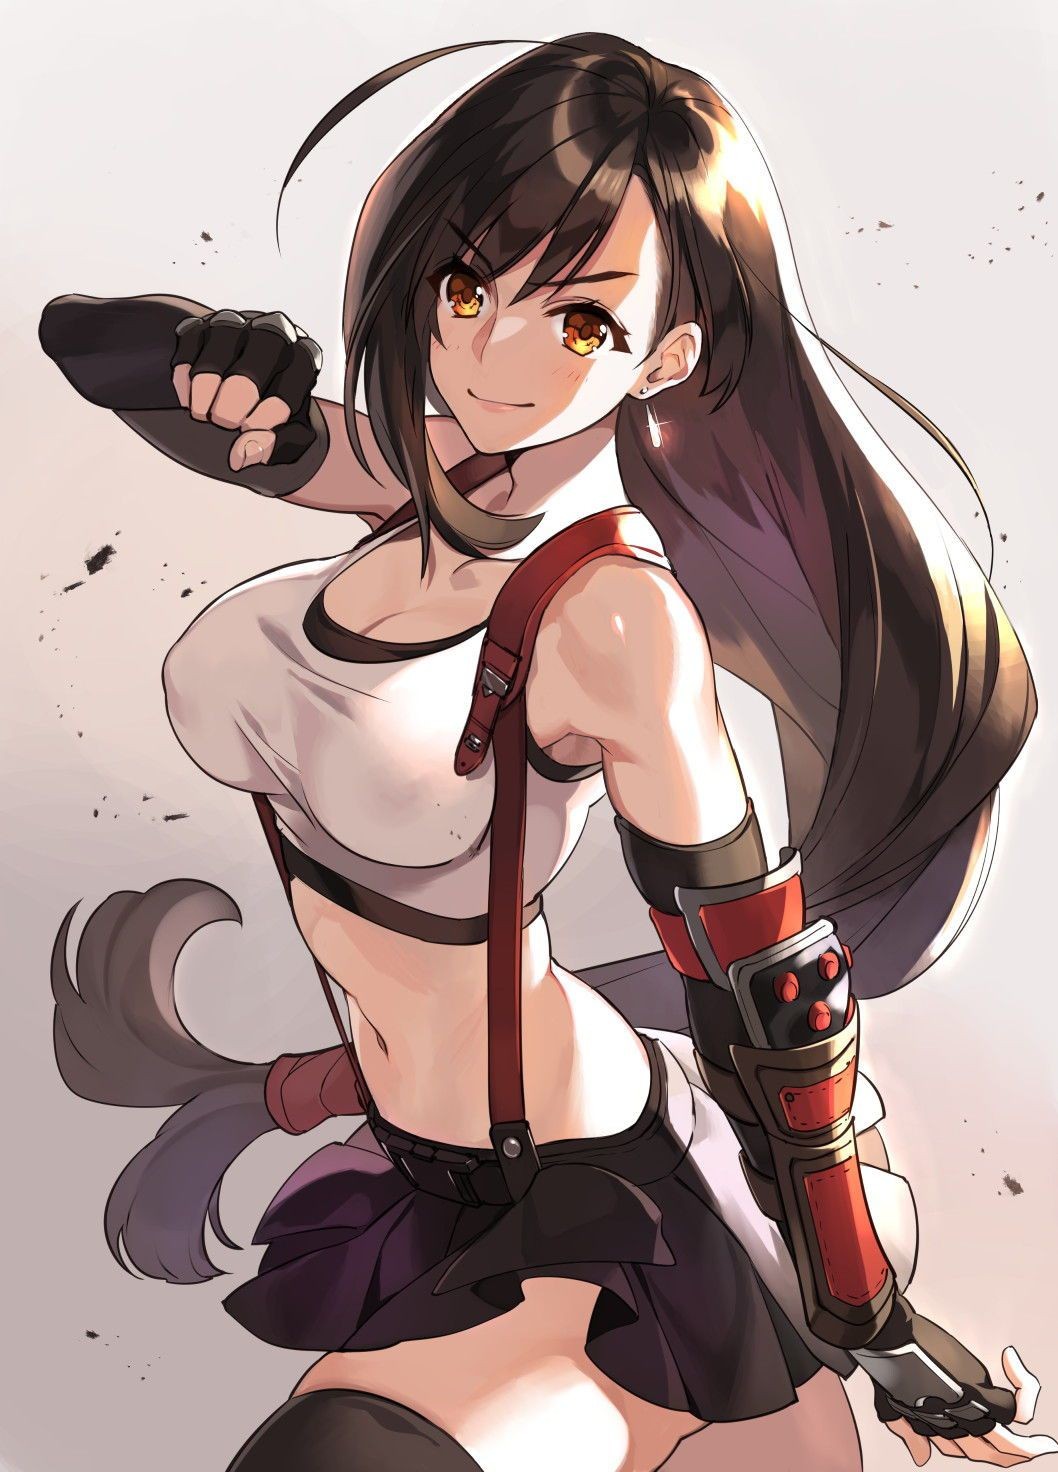 Fake [Final Fantasy] About The Second Image Of Tifa Lockhart Too Prostituta